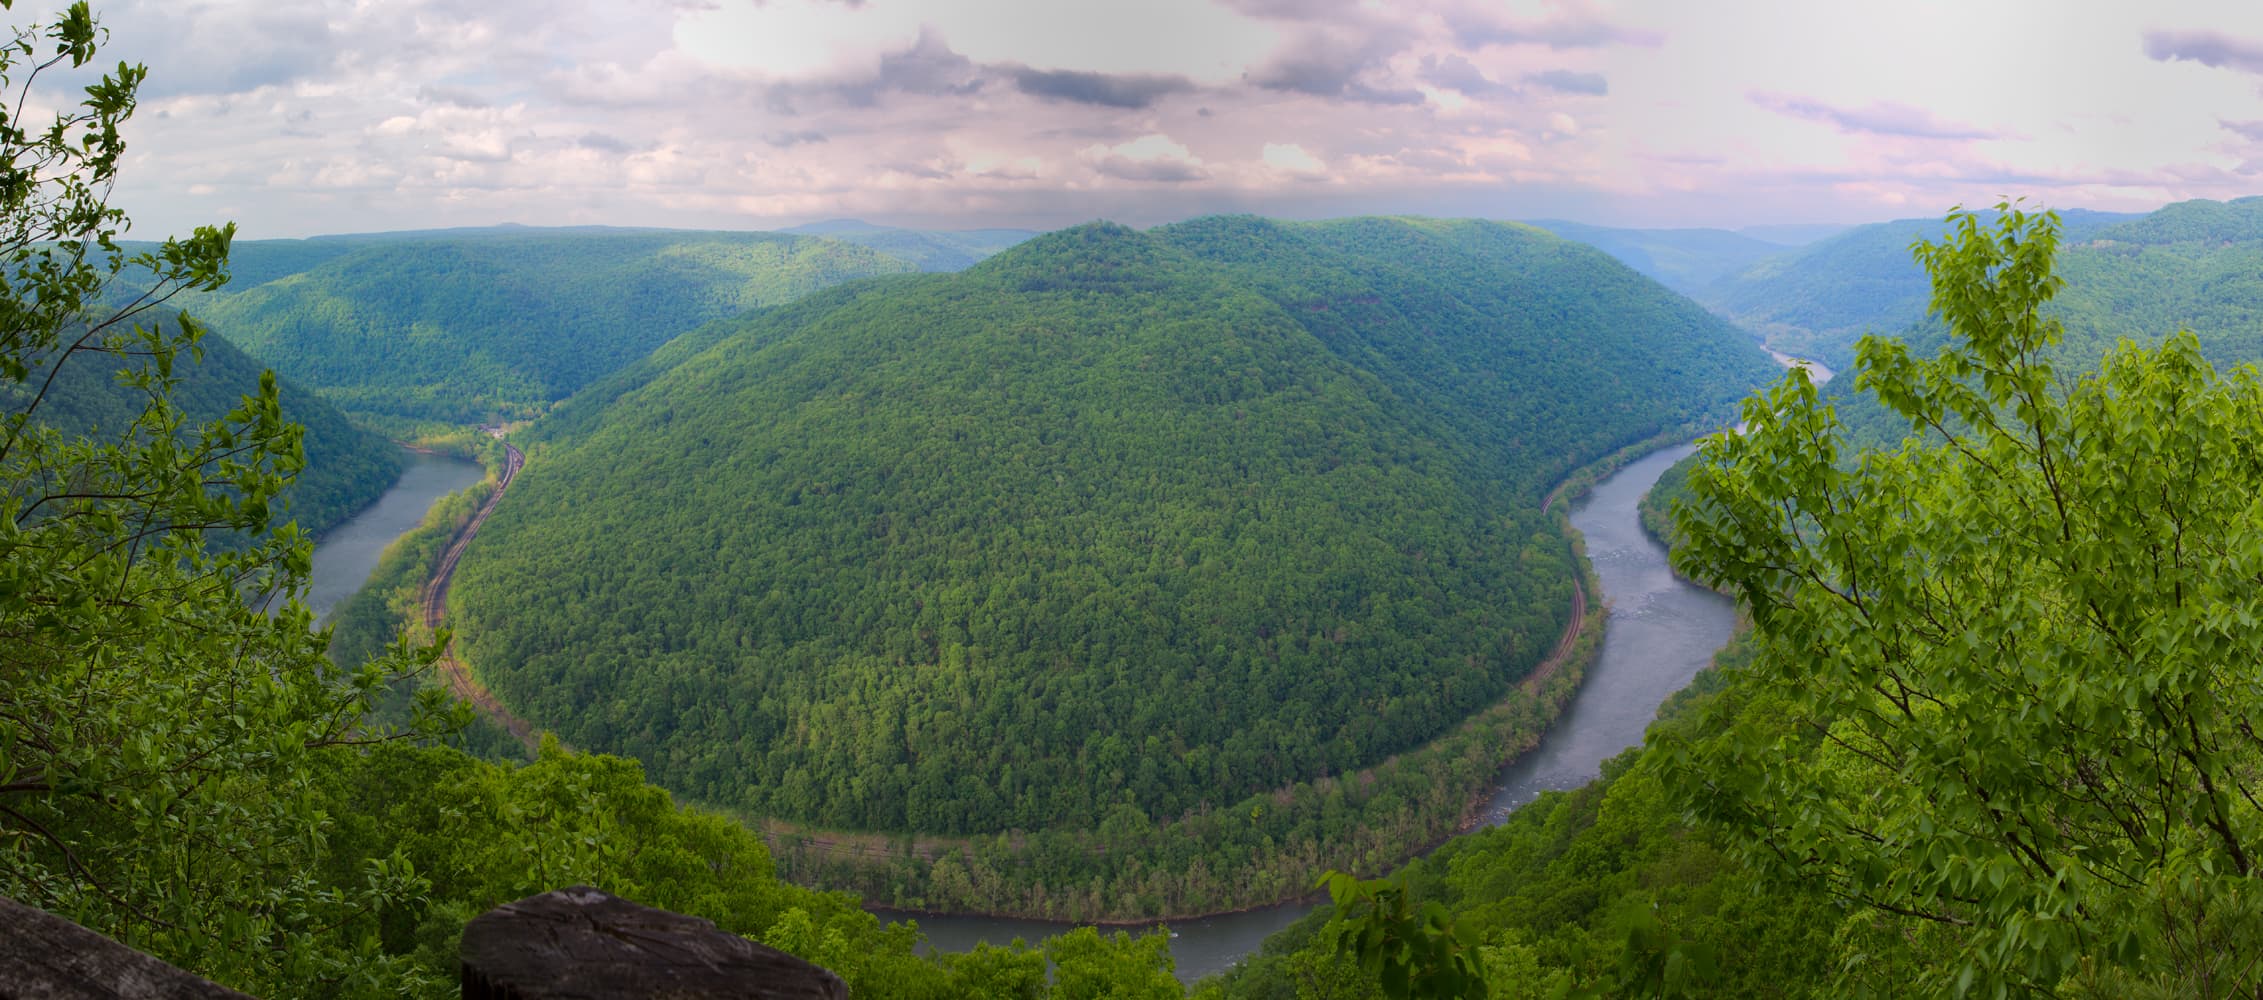 View from the North Overlook at the Grandview area of New River Gorge. (Courtesy)